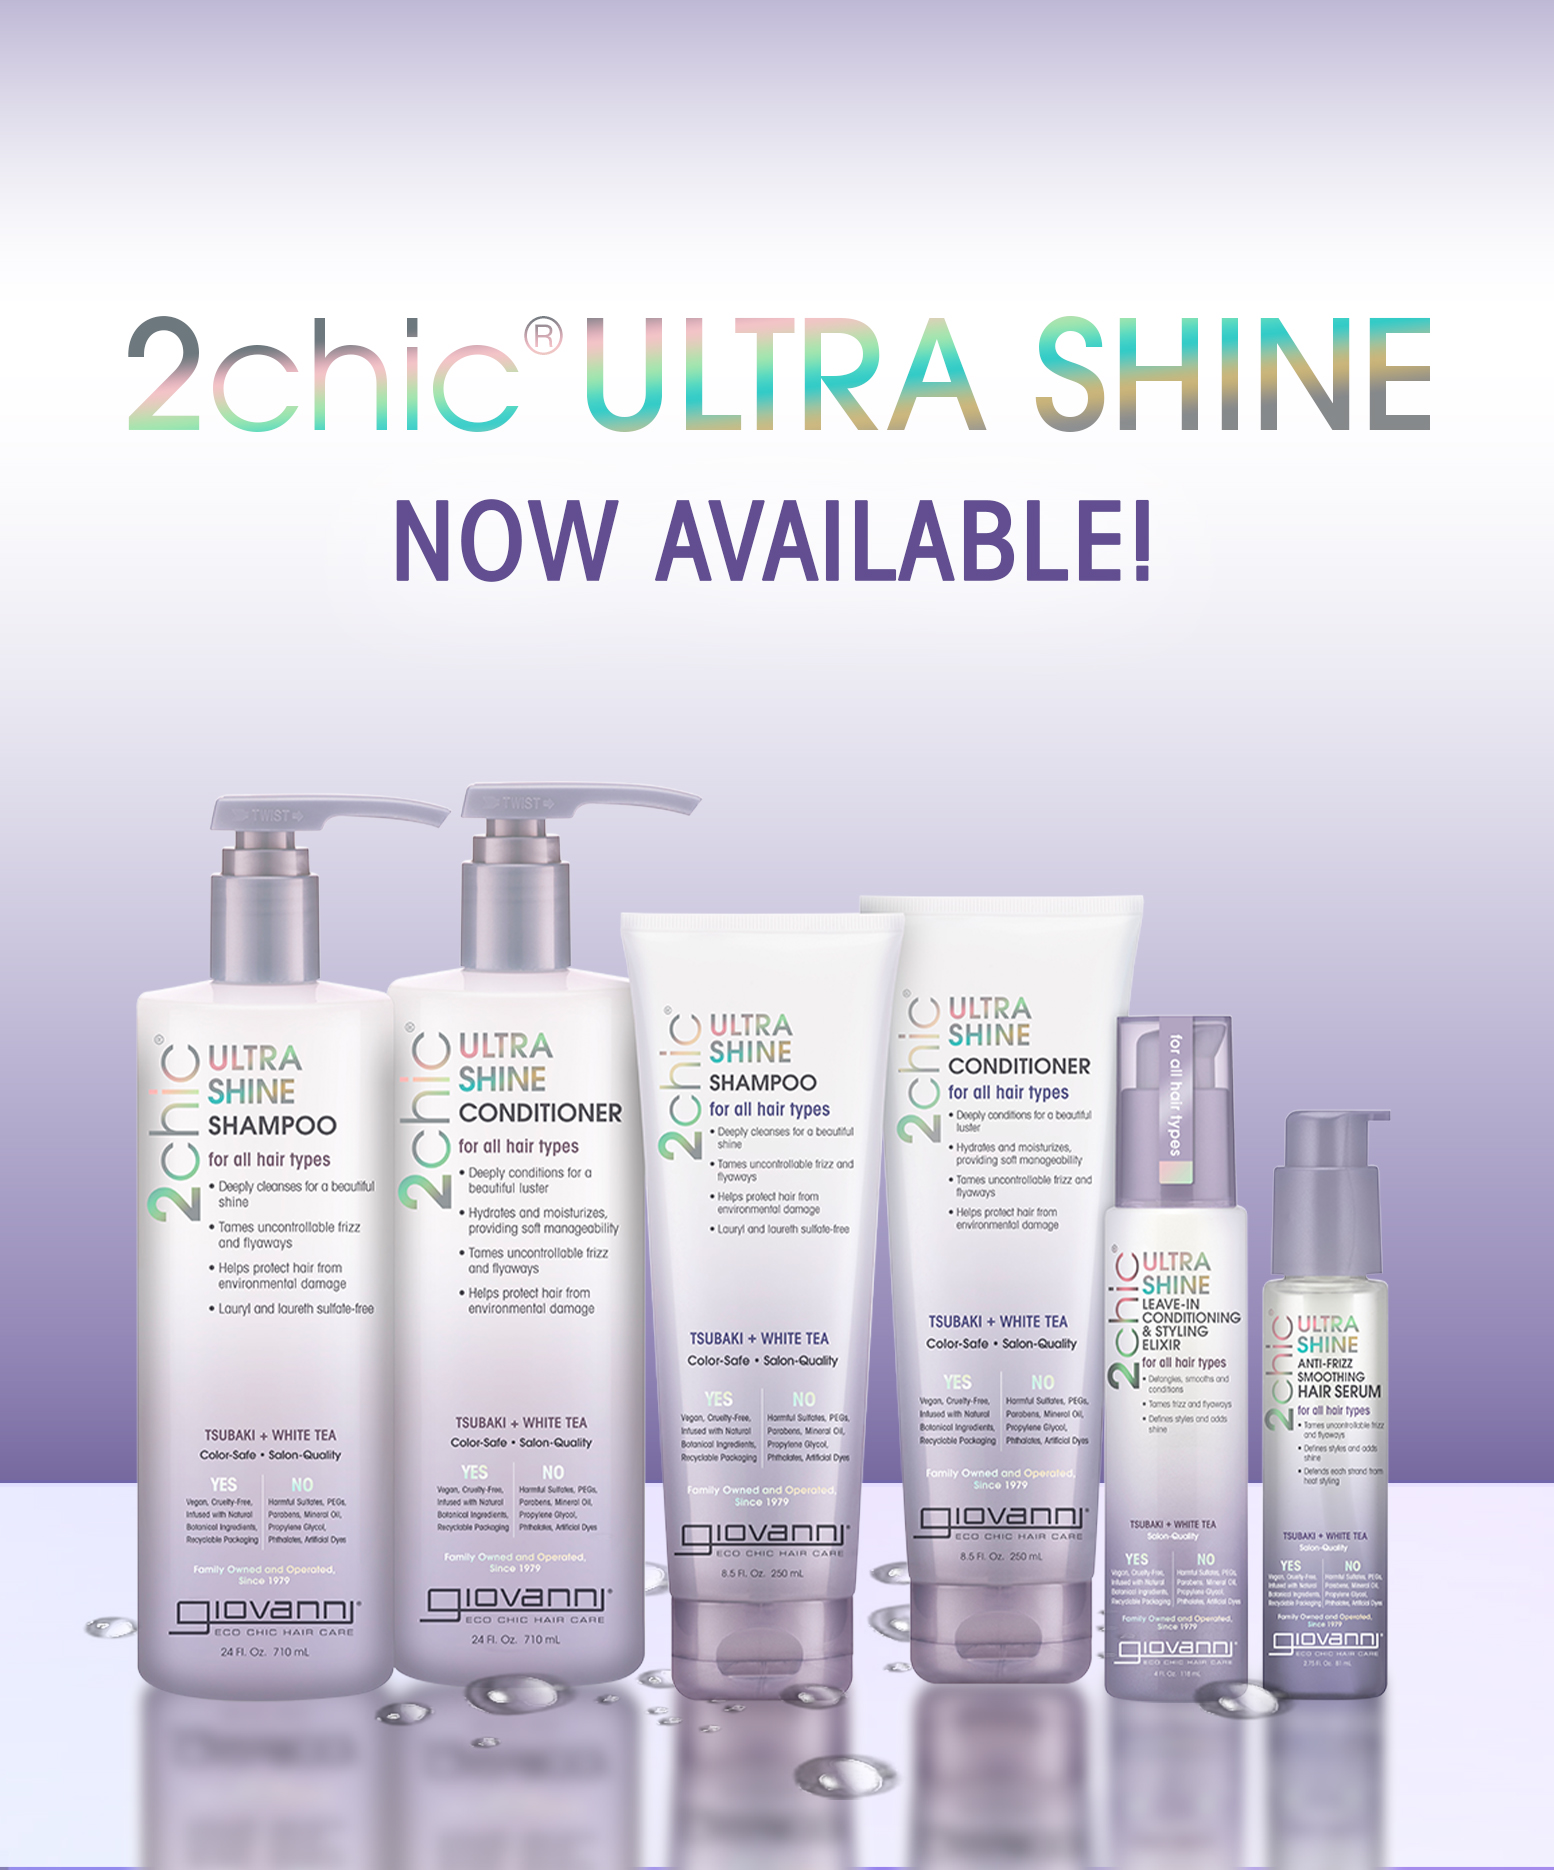 2chic Ultra Shine - Now Available